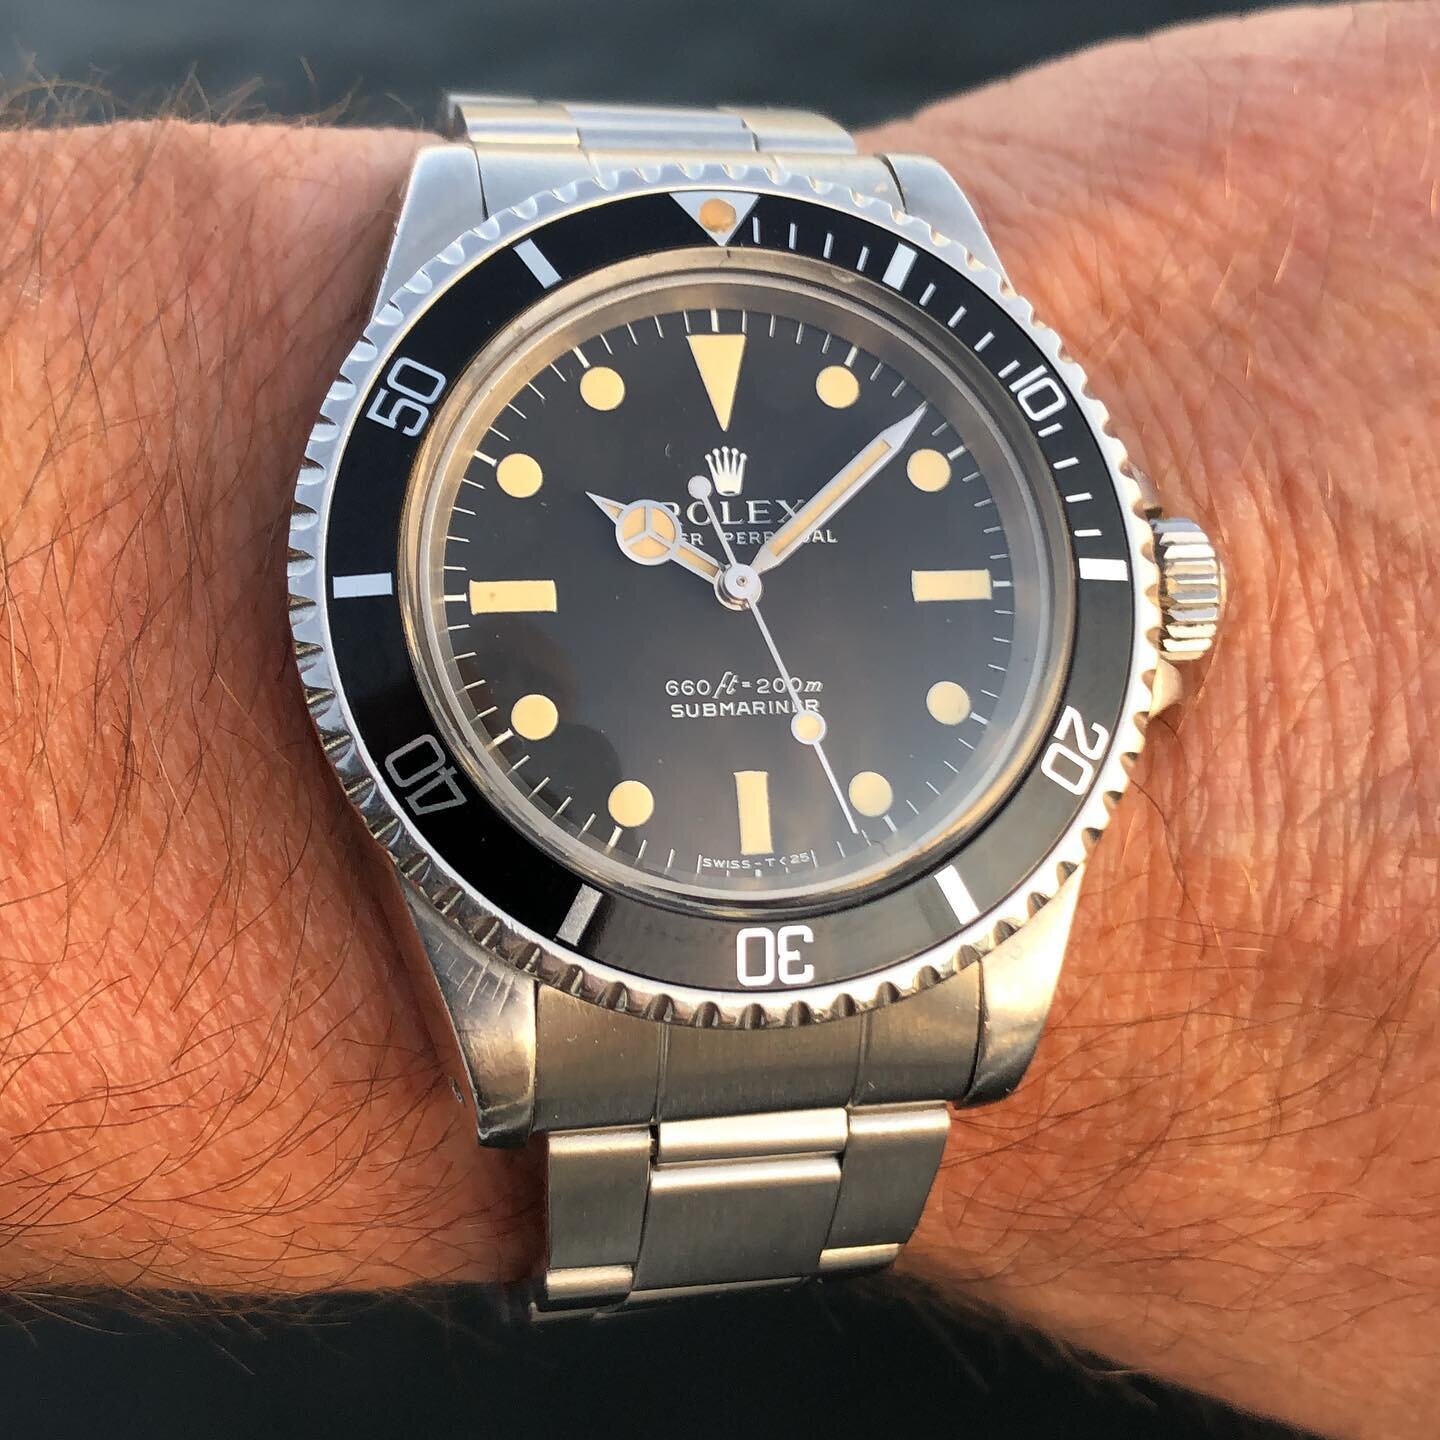 Beautiful Submariner 5513 -78 with Serif Dial. #rolex #submariner #5513 #9315 #folded #oyster #drwatch SOLD